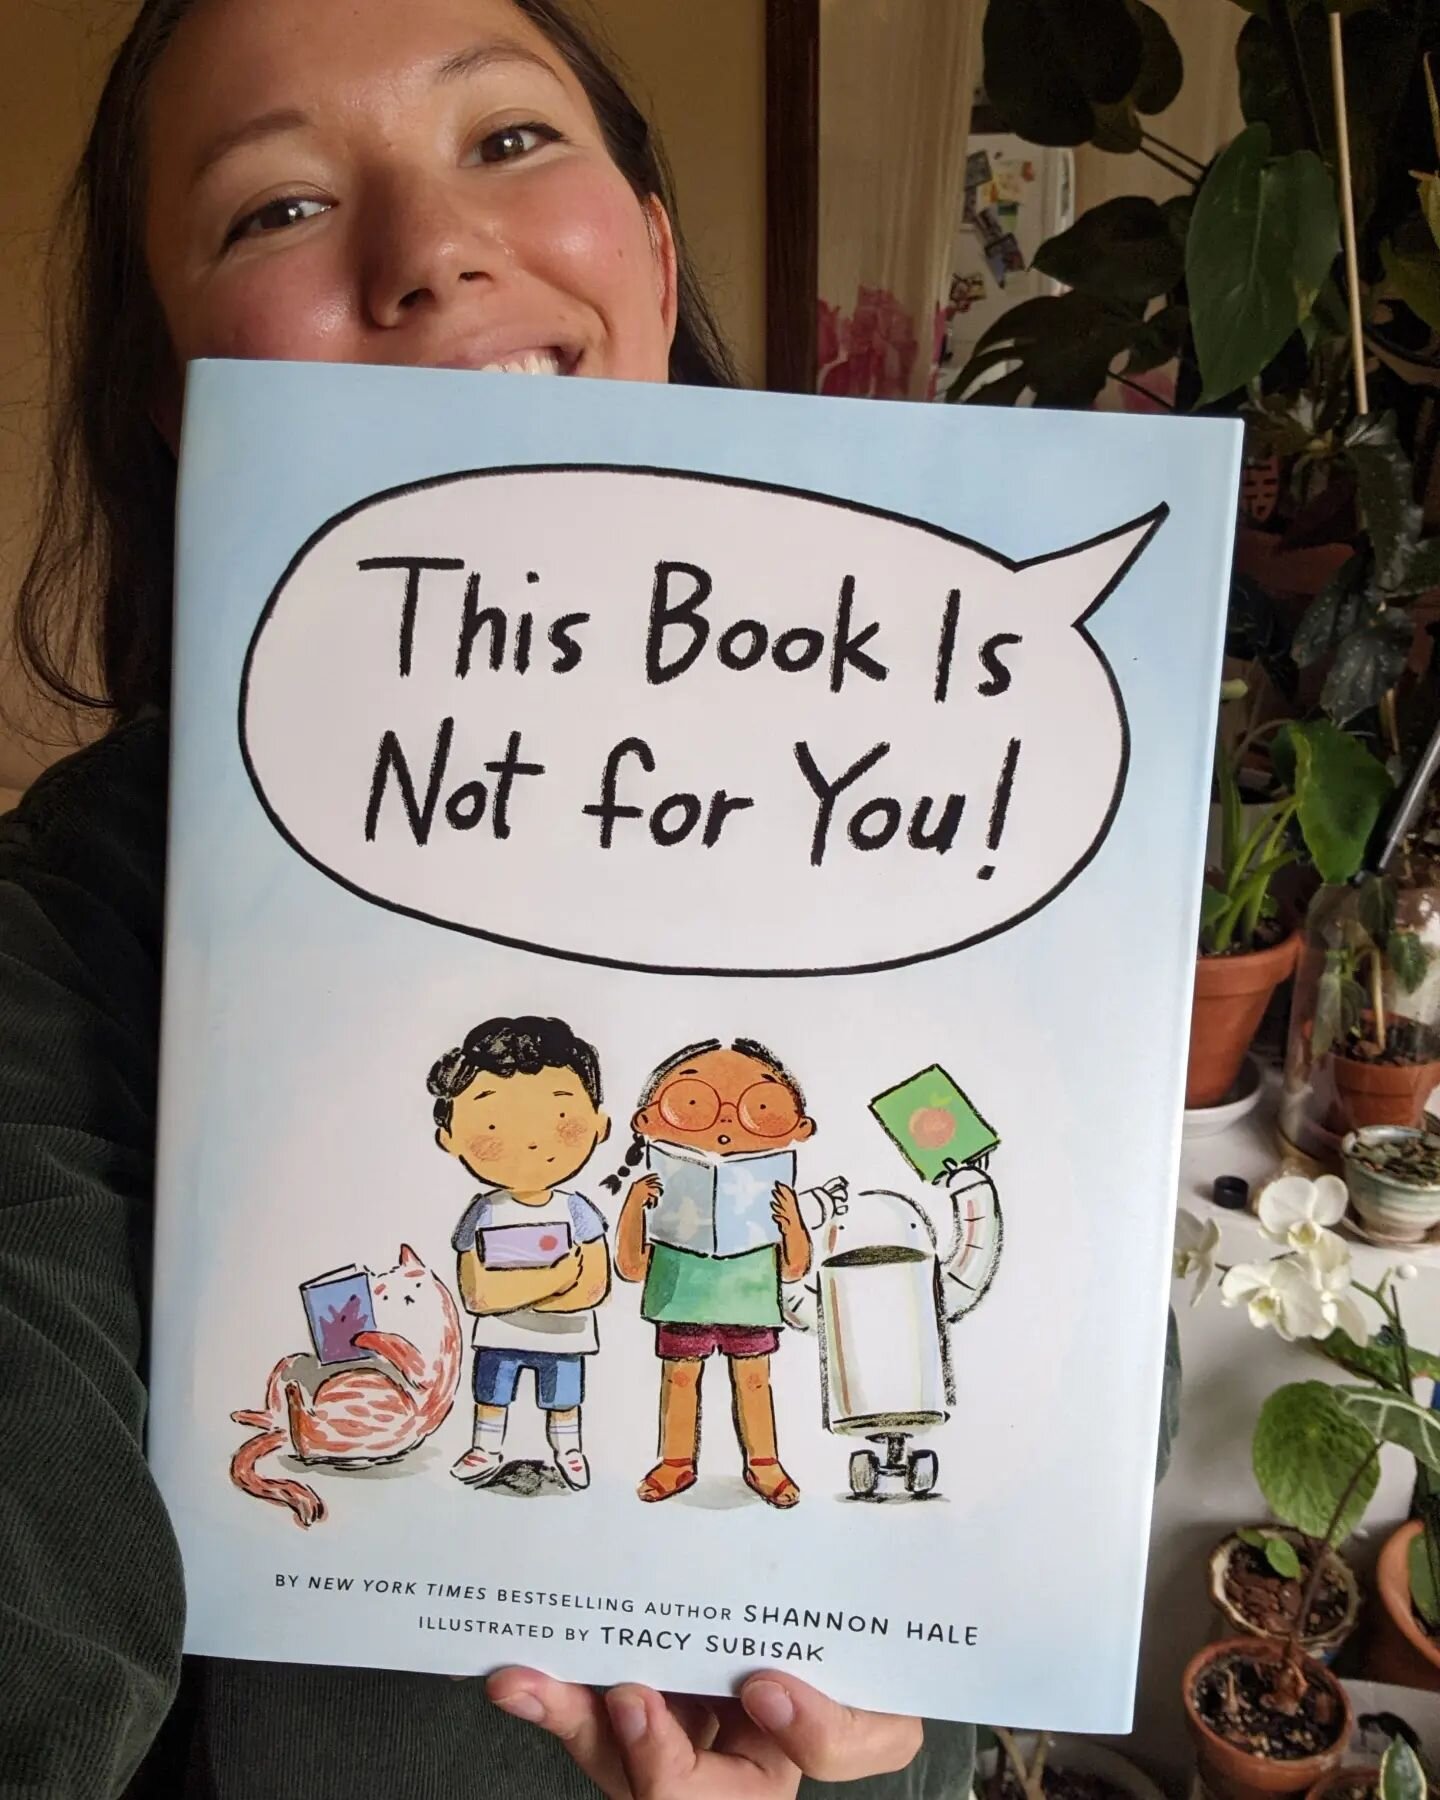 Happy Book Birthday to This Book Is Not For You!! I'm so happy to have gotten to illustrate this gem of a book that Shannon Hale so cleverly addresses how silly it is to assign certain books to certain genders (and types of living things for that mat